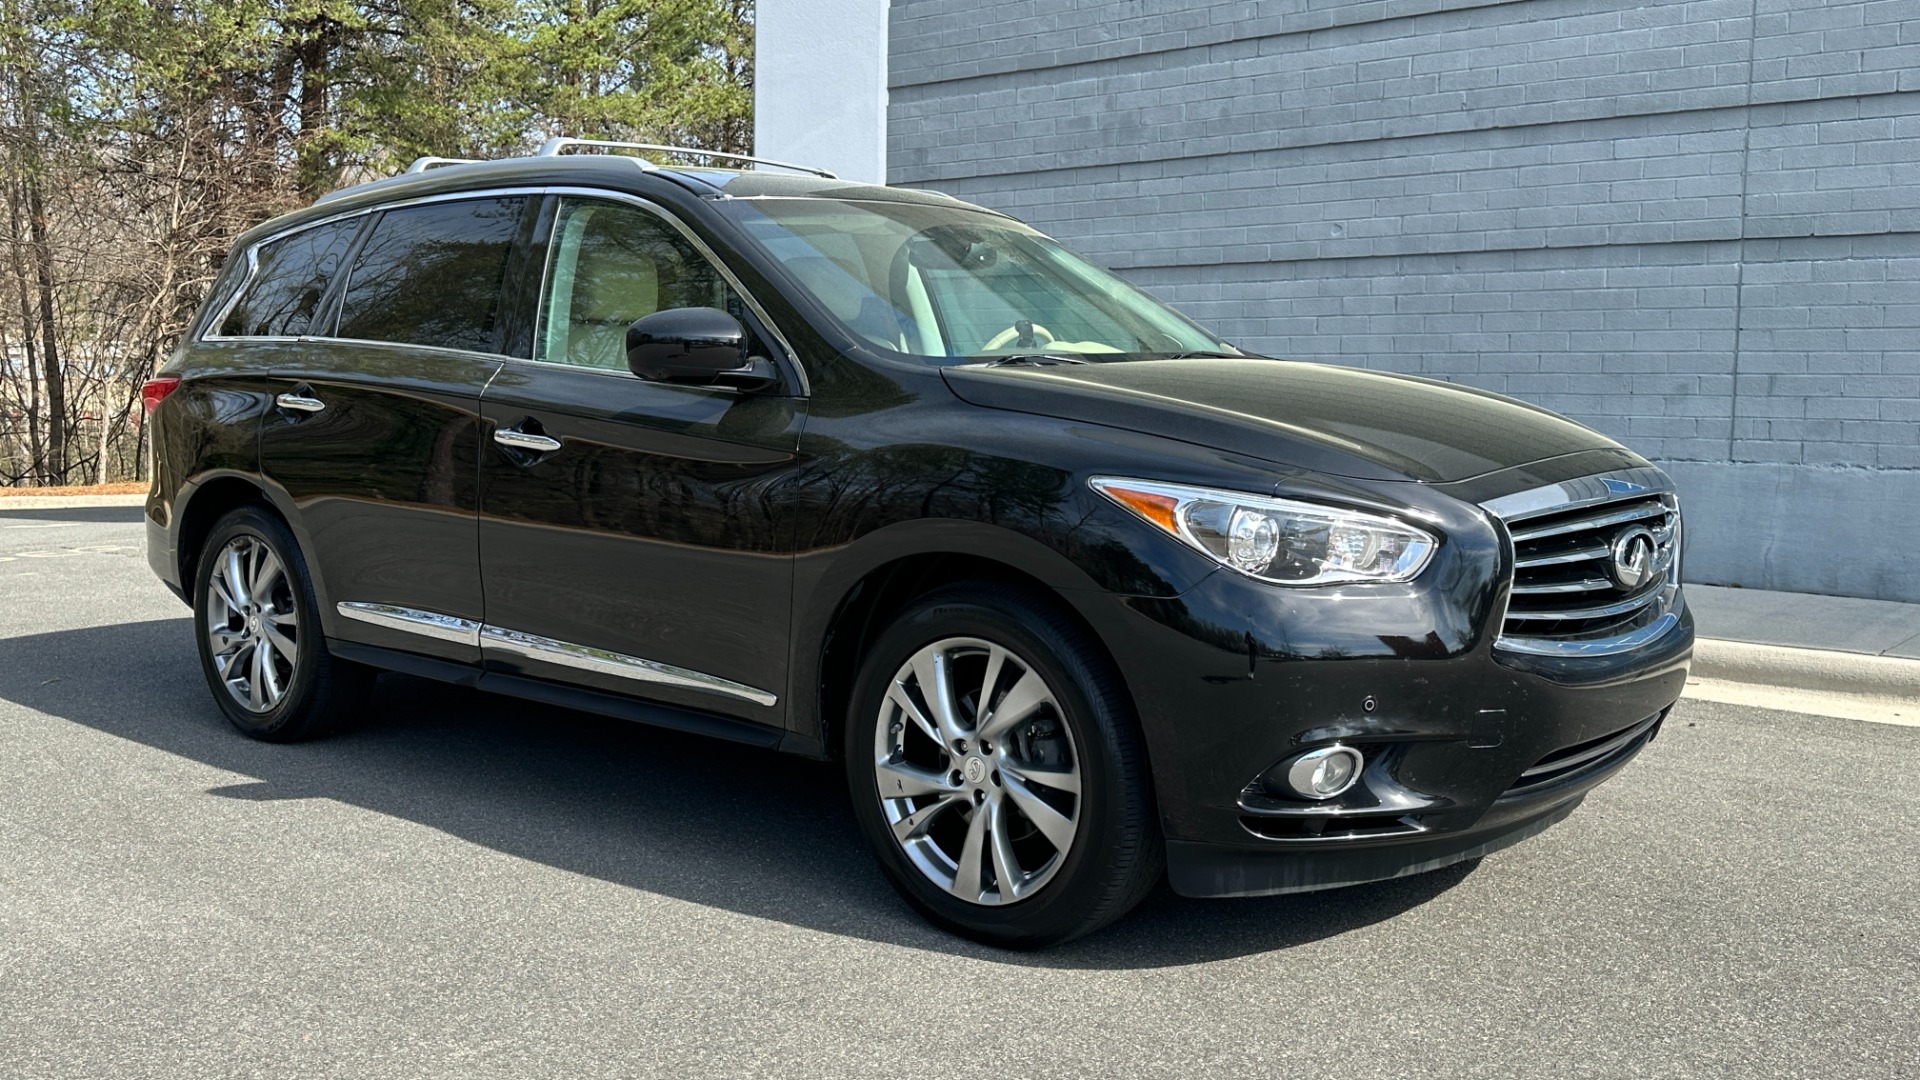 Used 2013 INFINITI JX35 AWD / DVD THEATER PKG / PREMIUM / DELUXE TECH / CARGO / TECH PKG for sale Sold at Formula Imports in Charlotte NC 28227 5